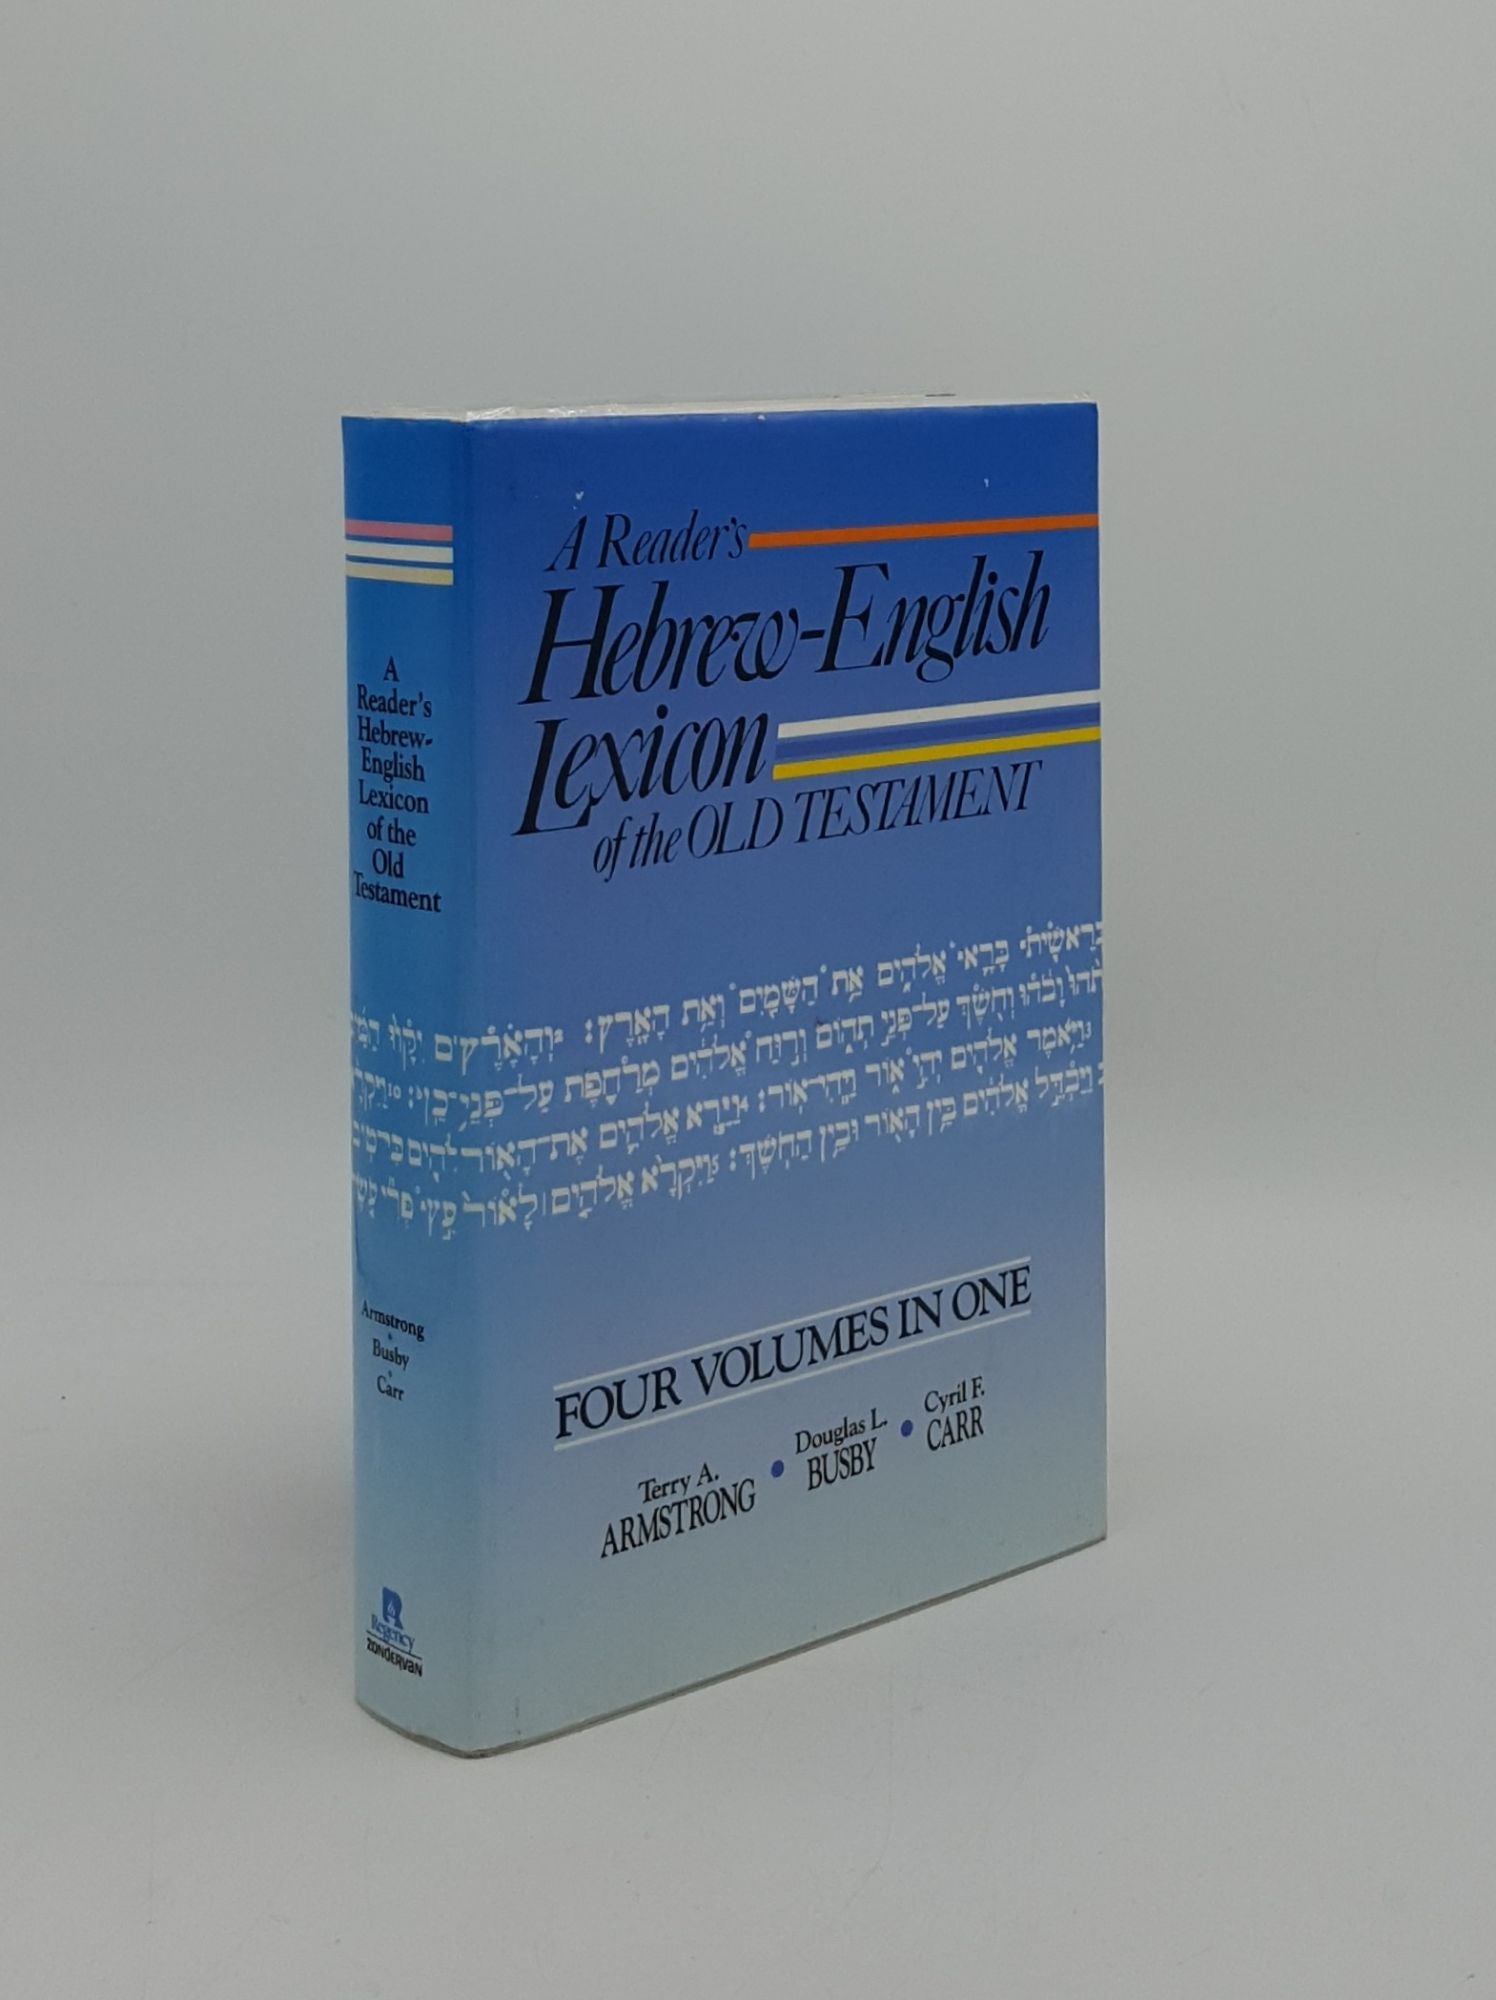 ARMSTRONG Terry A., BUSBY Douglas L., CARR Cyril F. - A Reader's Hebrew-English Lexicon of the Old Testament Four Volumes in One